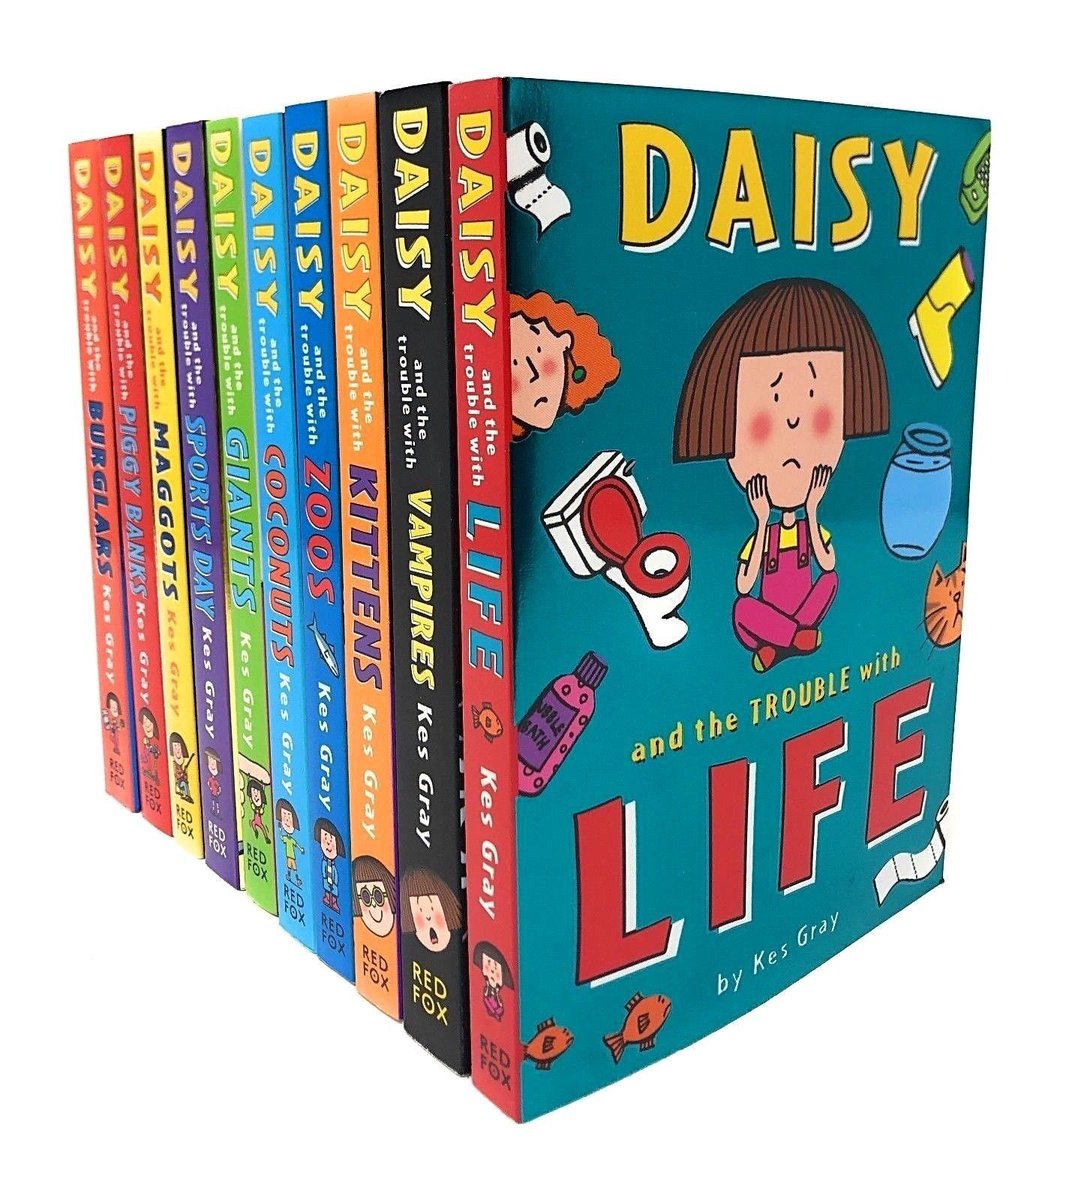 @MissC_11 #kesgray @ICanDrawDinos @NickSharratt1 ‘s Daisy and the trouble with...series. All great for for a funny read!! #readingrocks #readingforpleasure